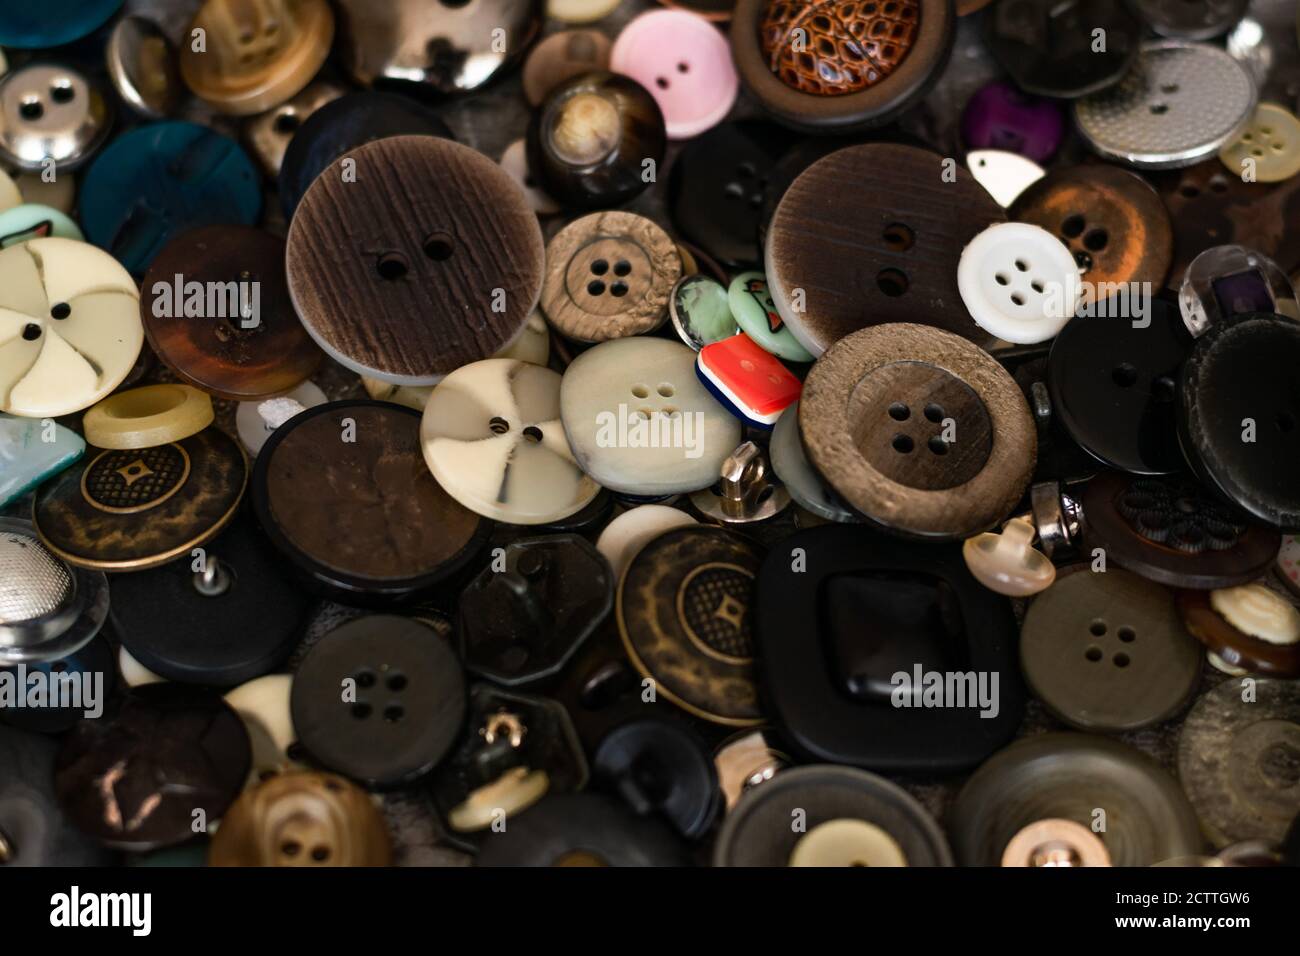 Close-up view of many buttons, sewing items Stock Photo